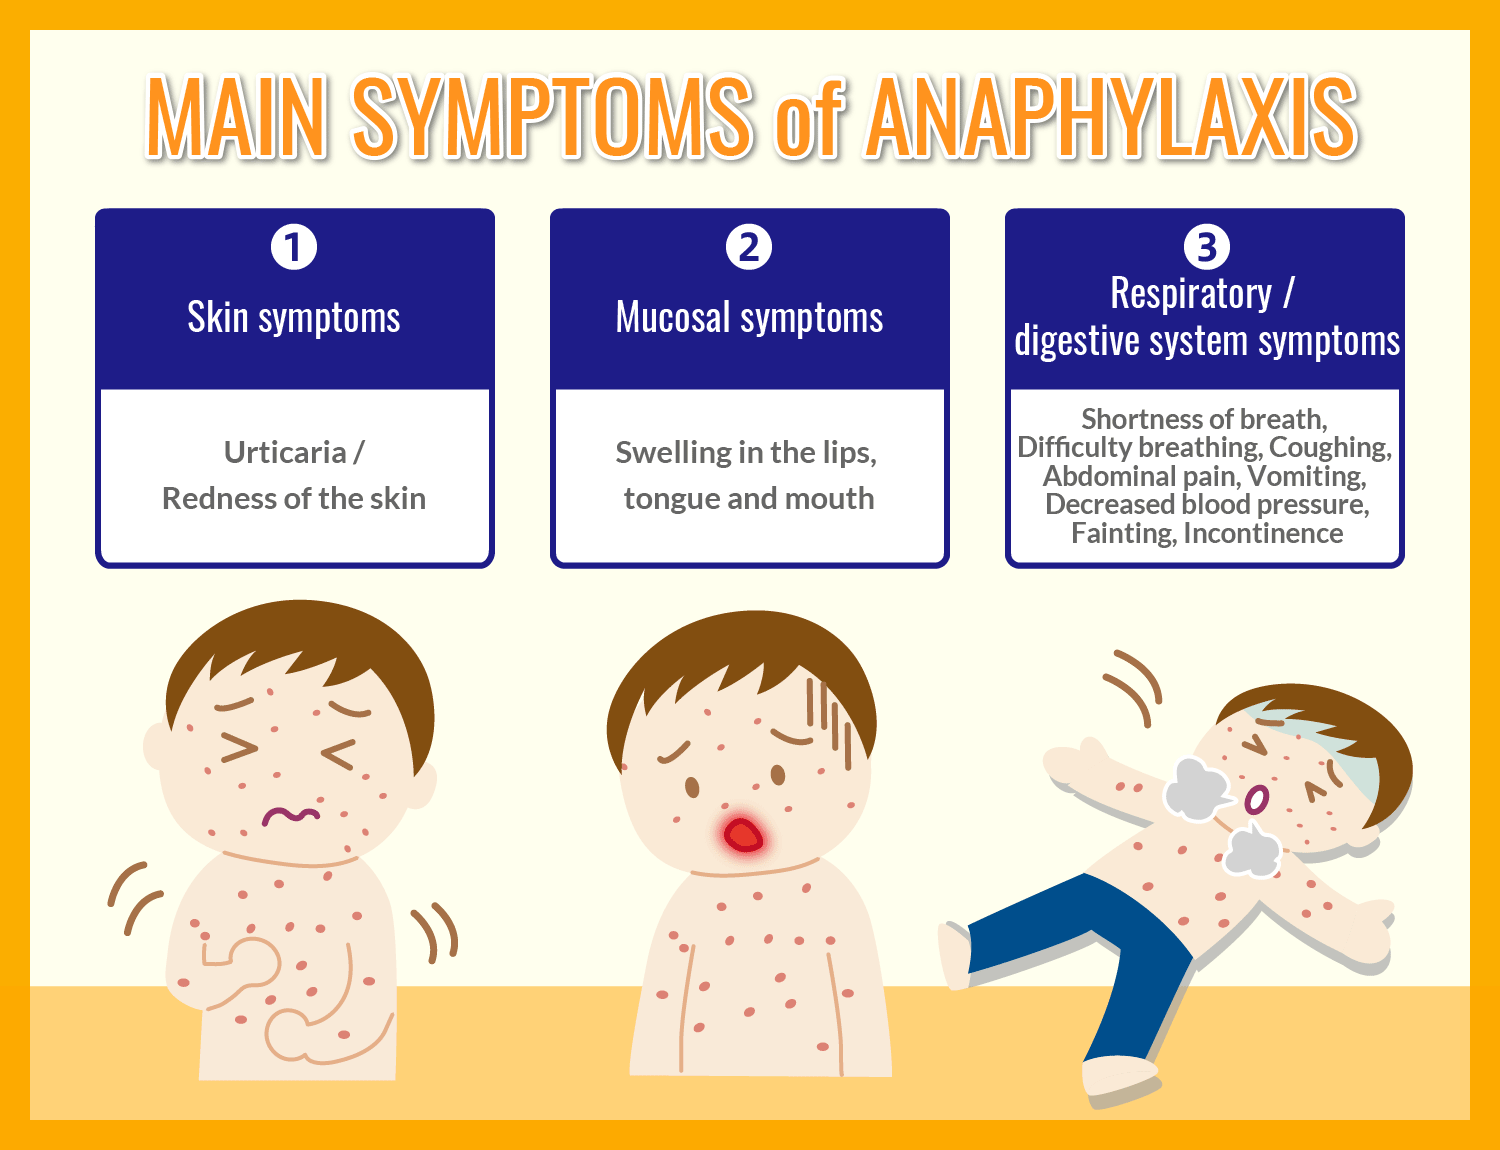 MAIN SYMPTOMS of ANAPHYLAXIS